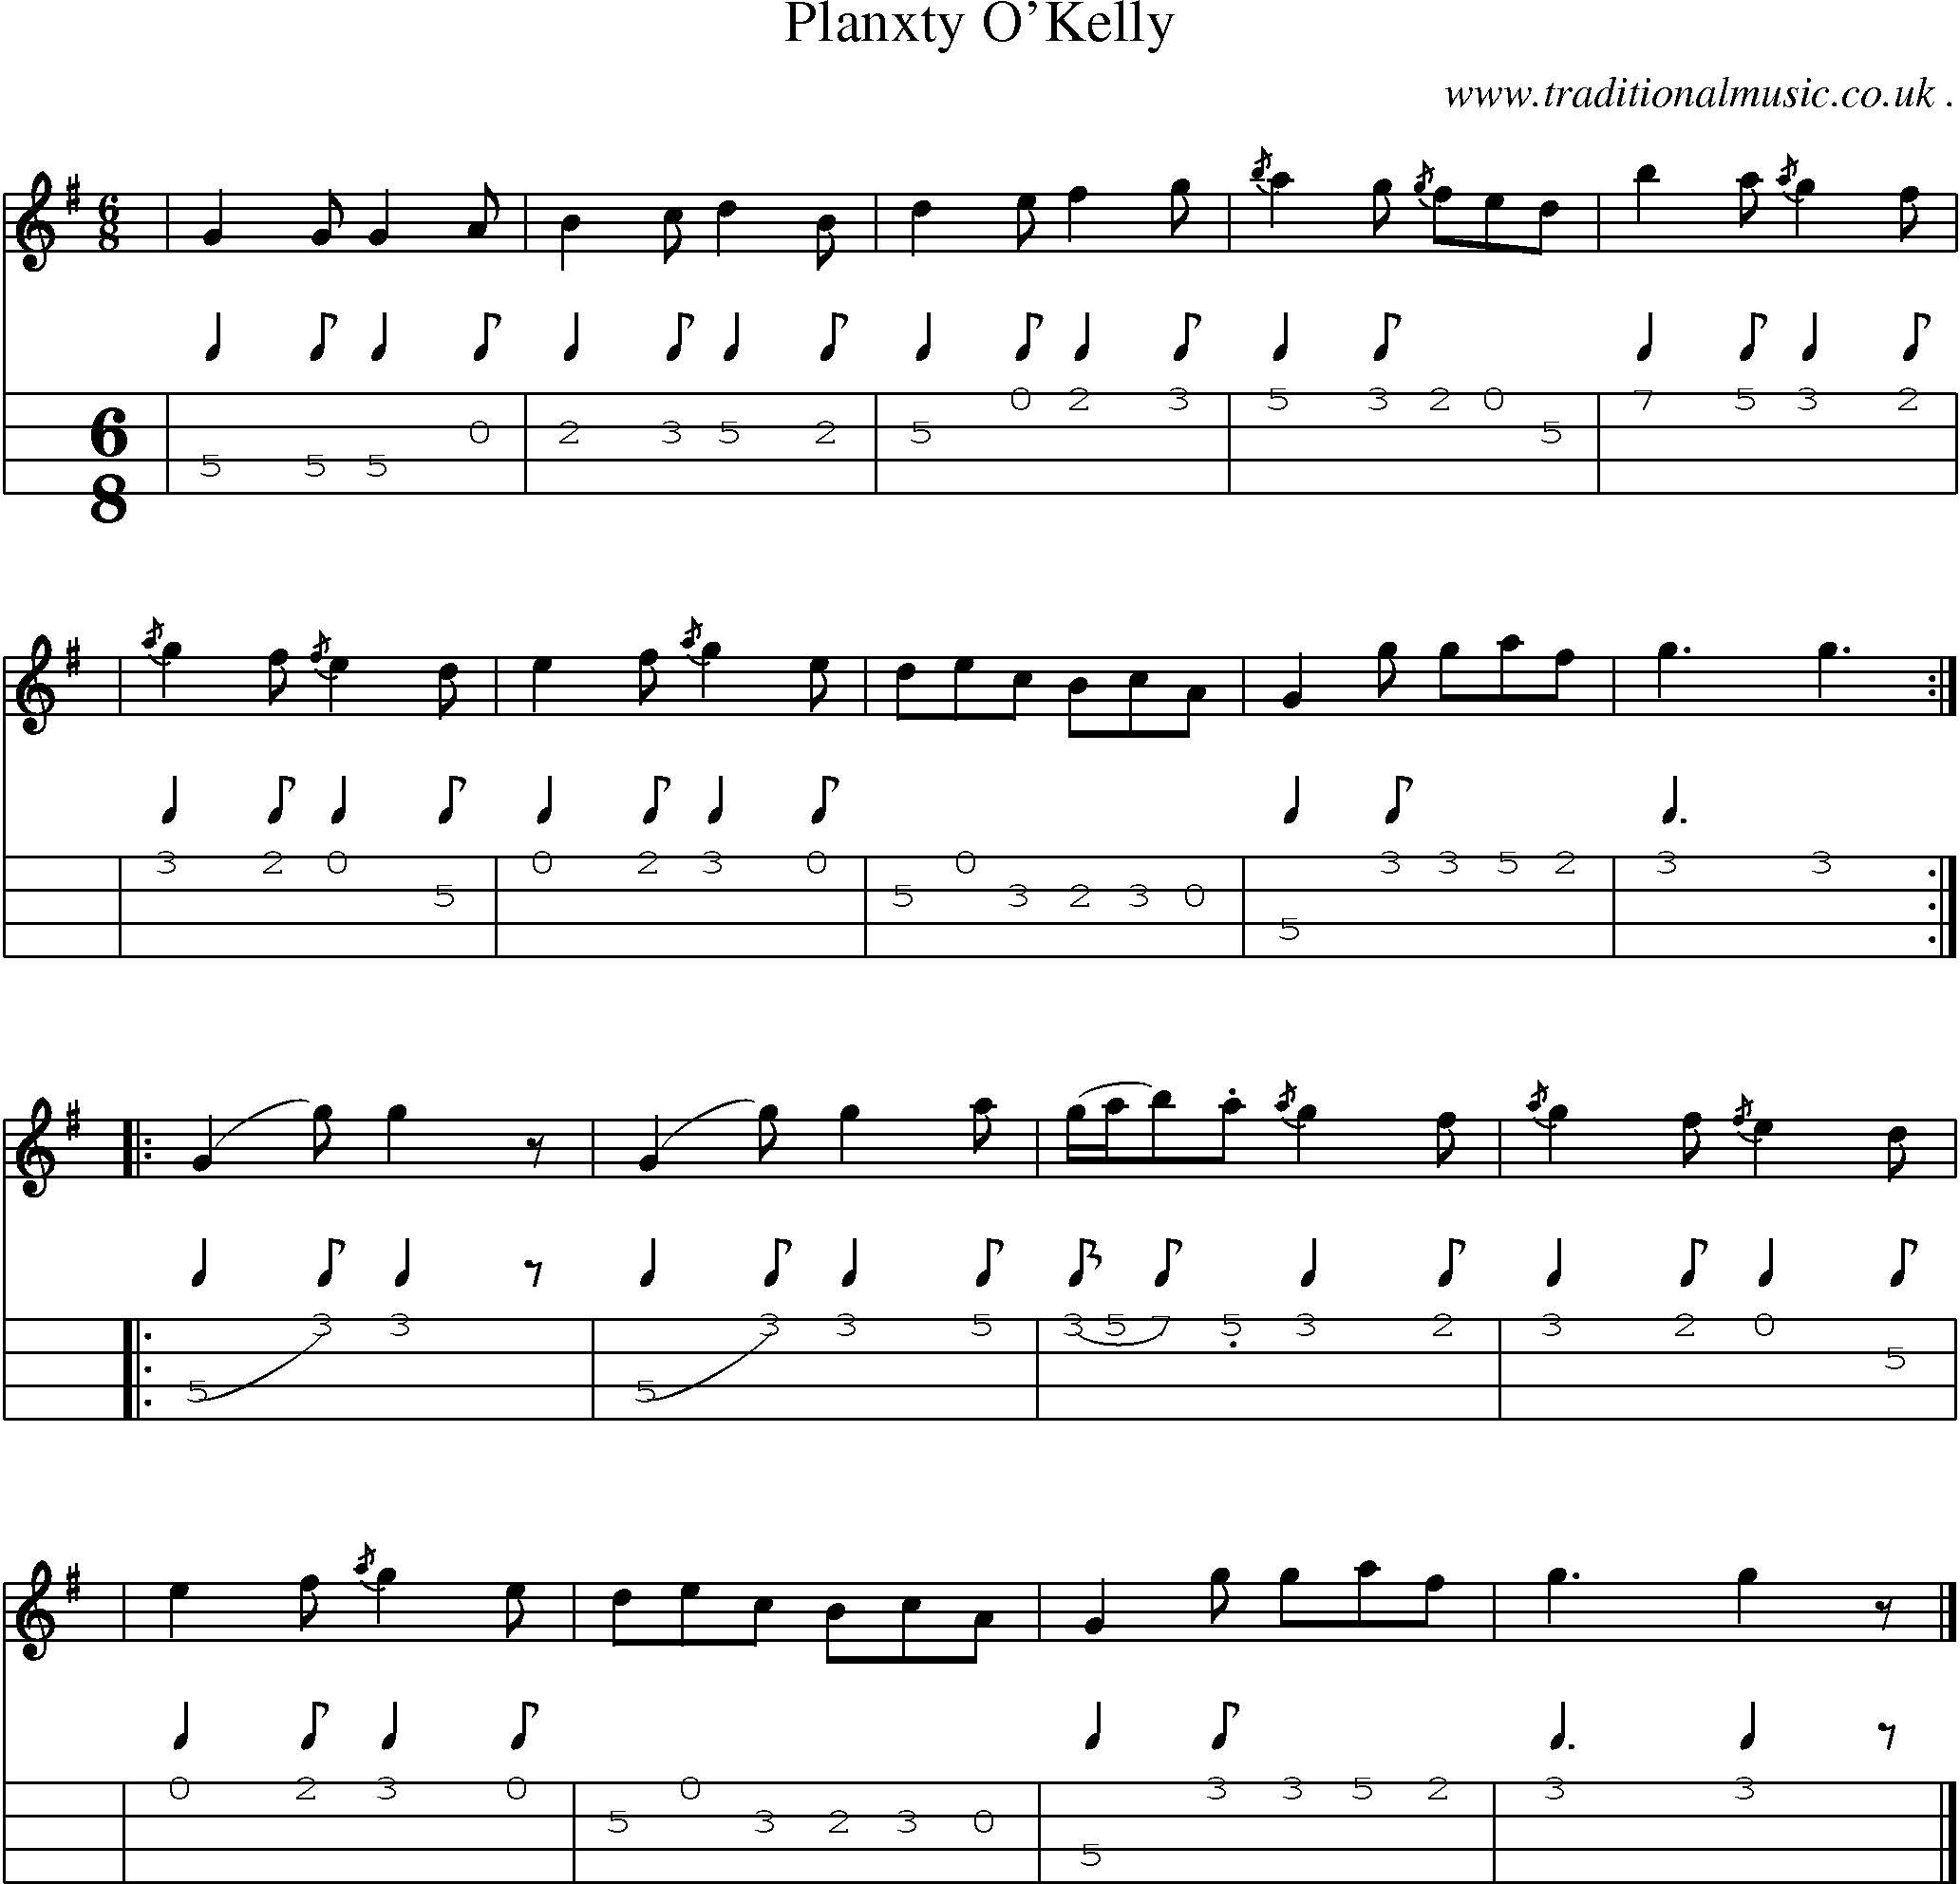 Sheet-music  score, Chords and Mandolin Tabs for Planxty Okelly